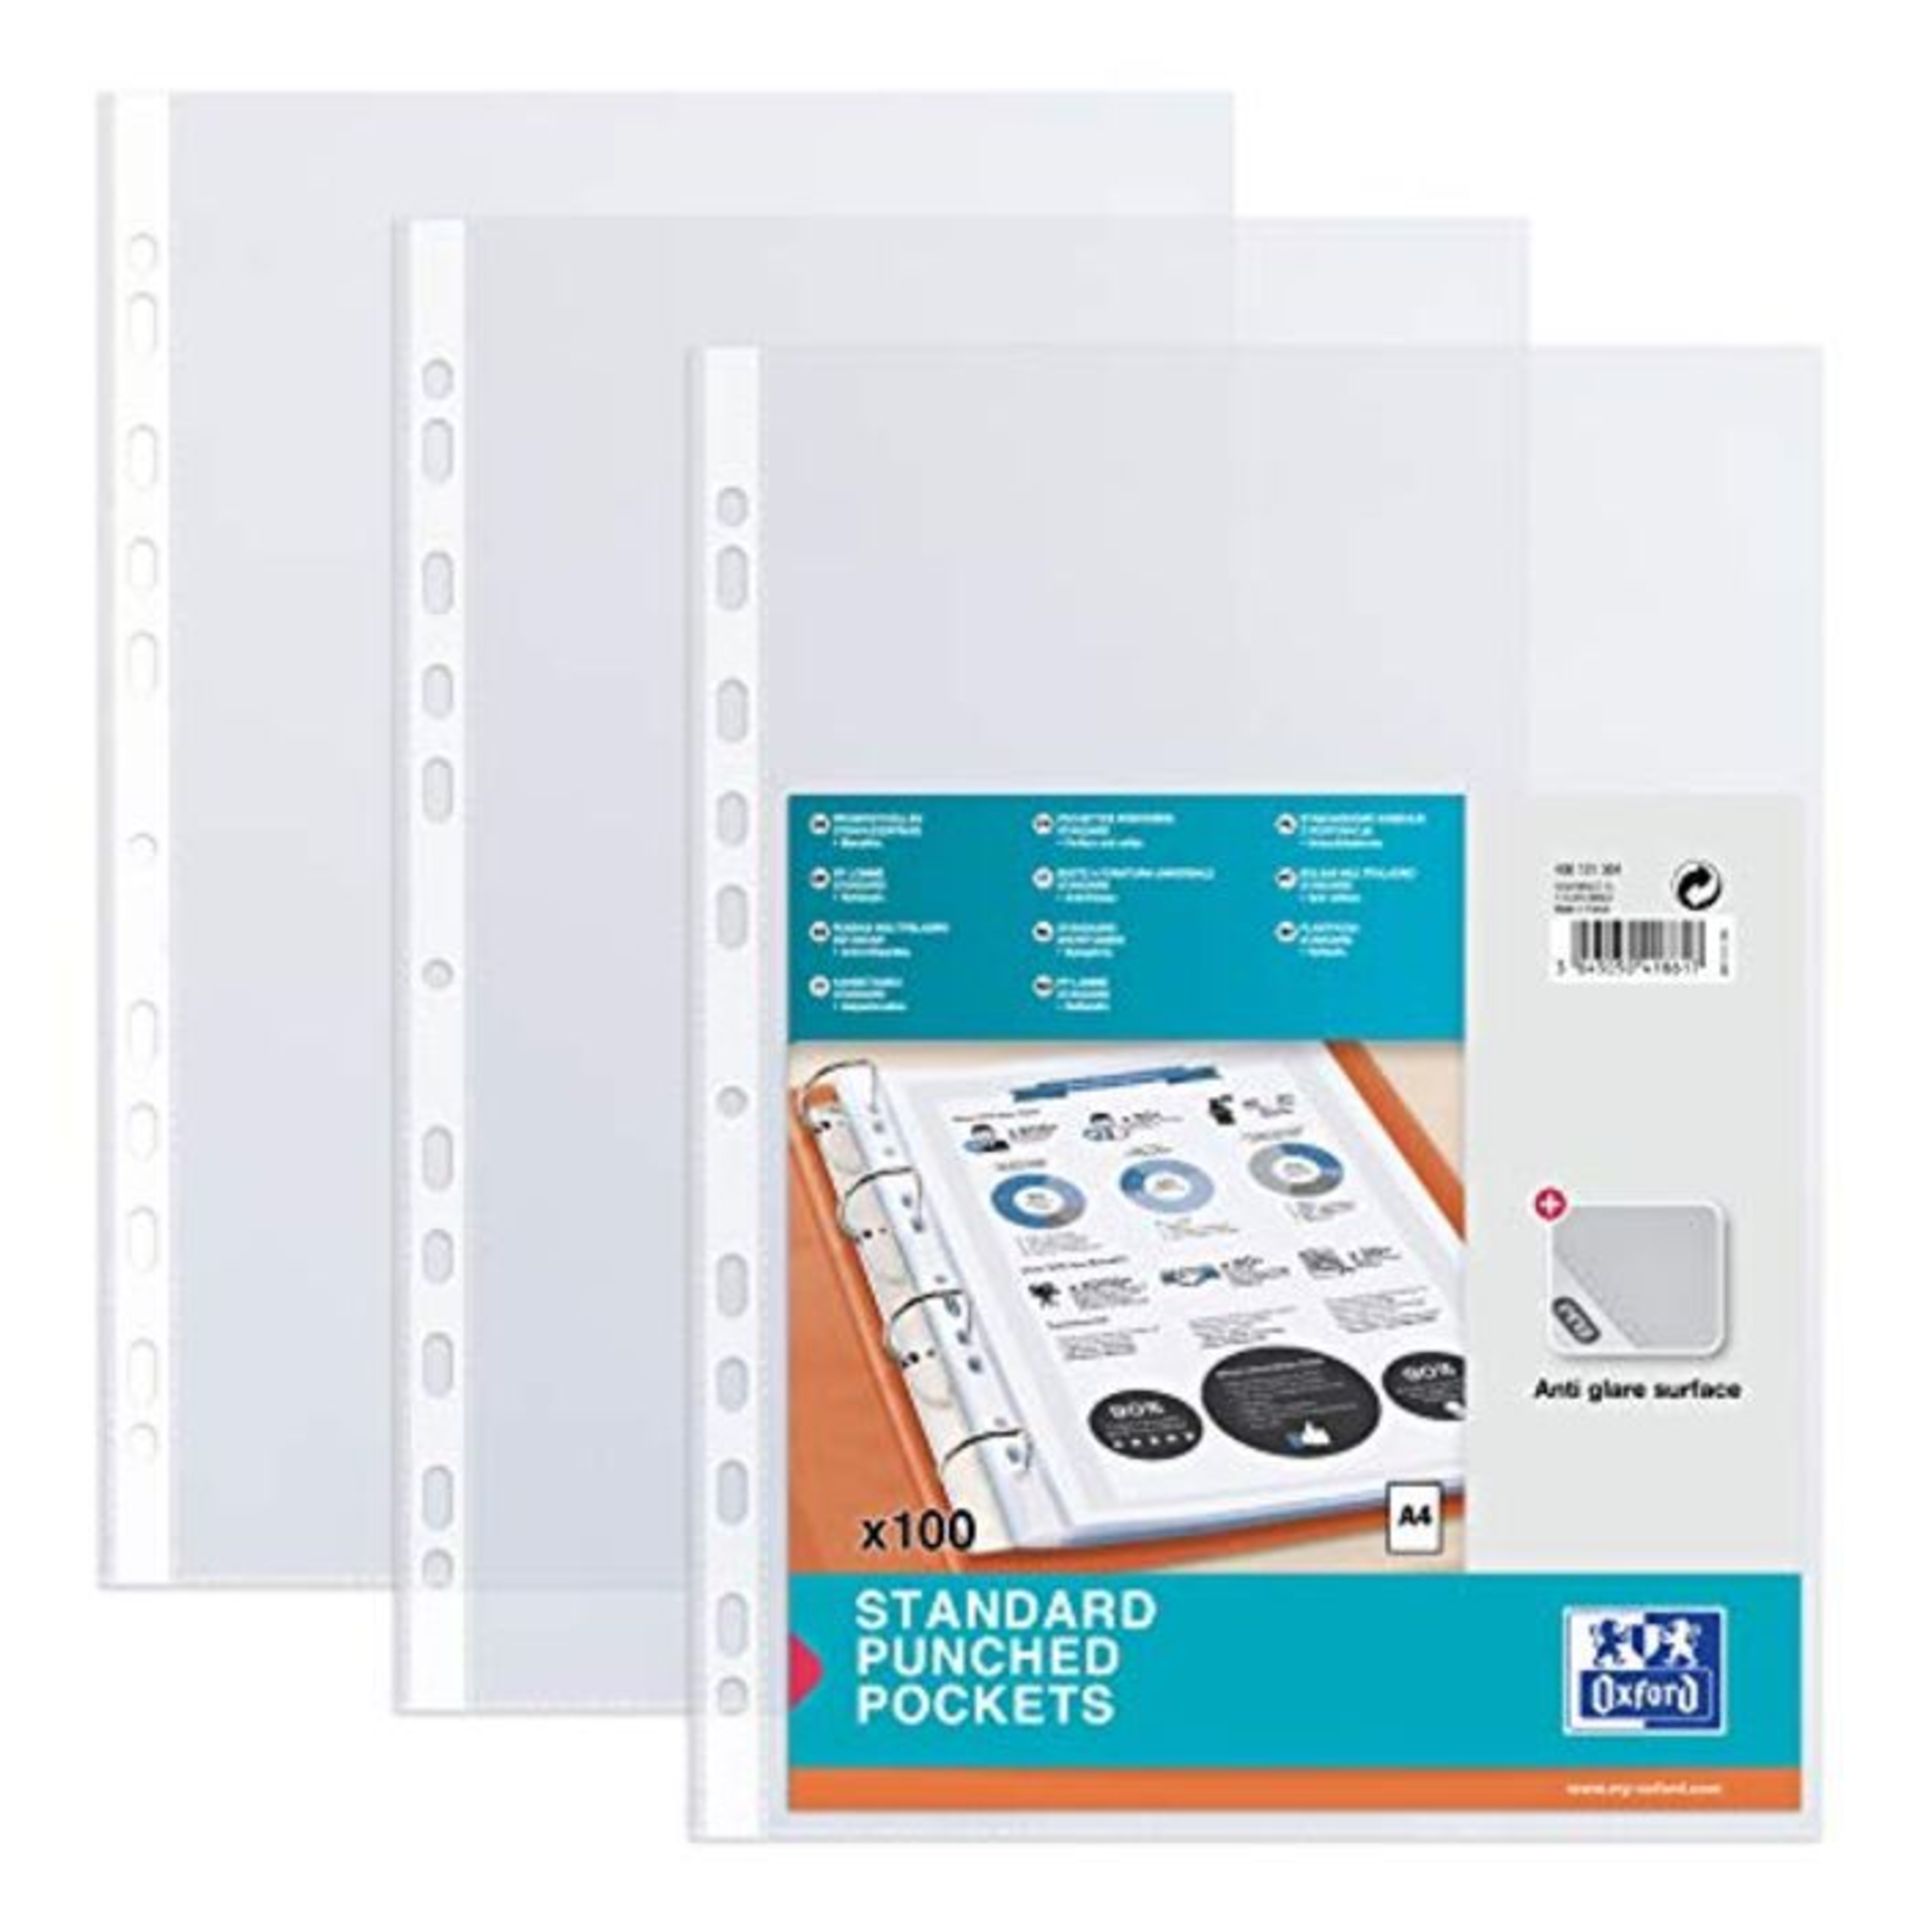 COMBINED RRP £418.00 LOT TO CONTAIN 50 ASSORTED Tech Products: GOGME, Post-it, Maped, Maped, Br - Image 16 of 51